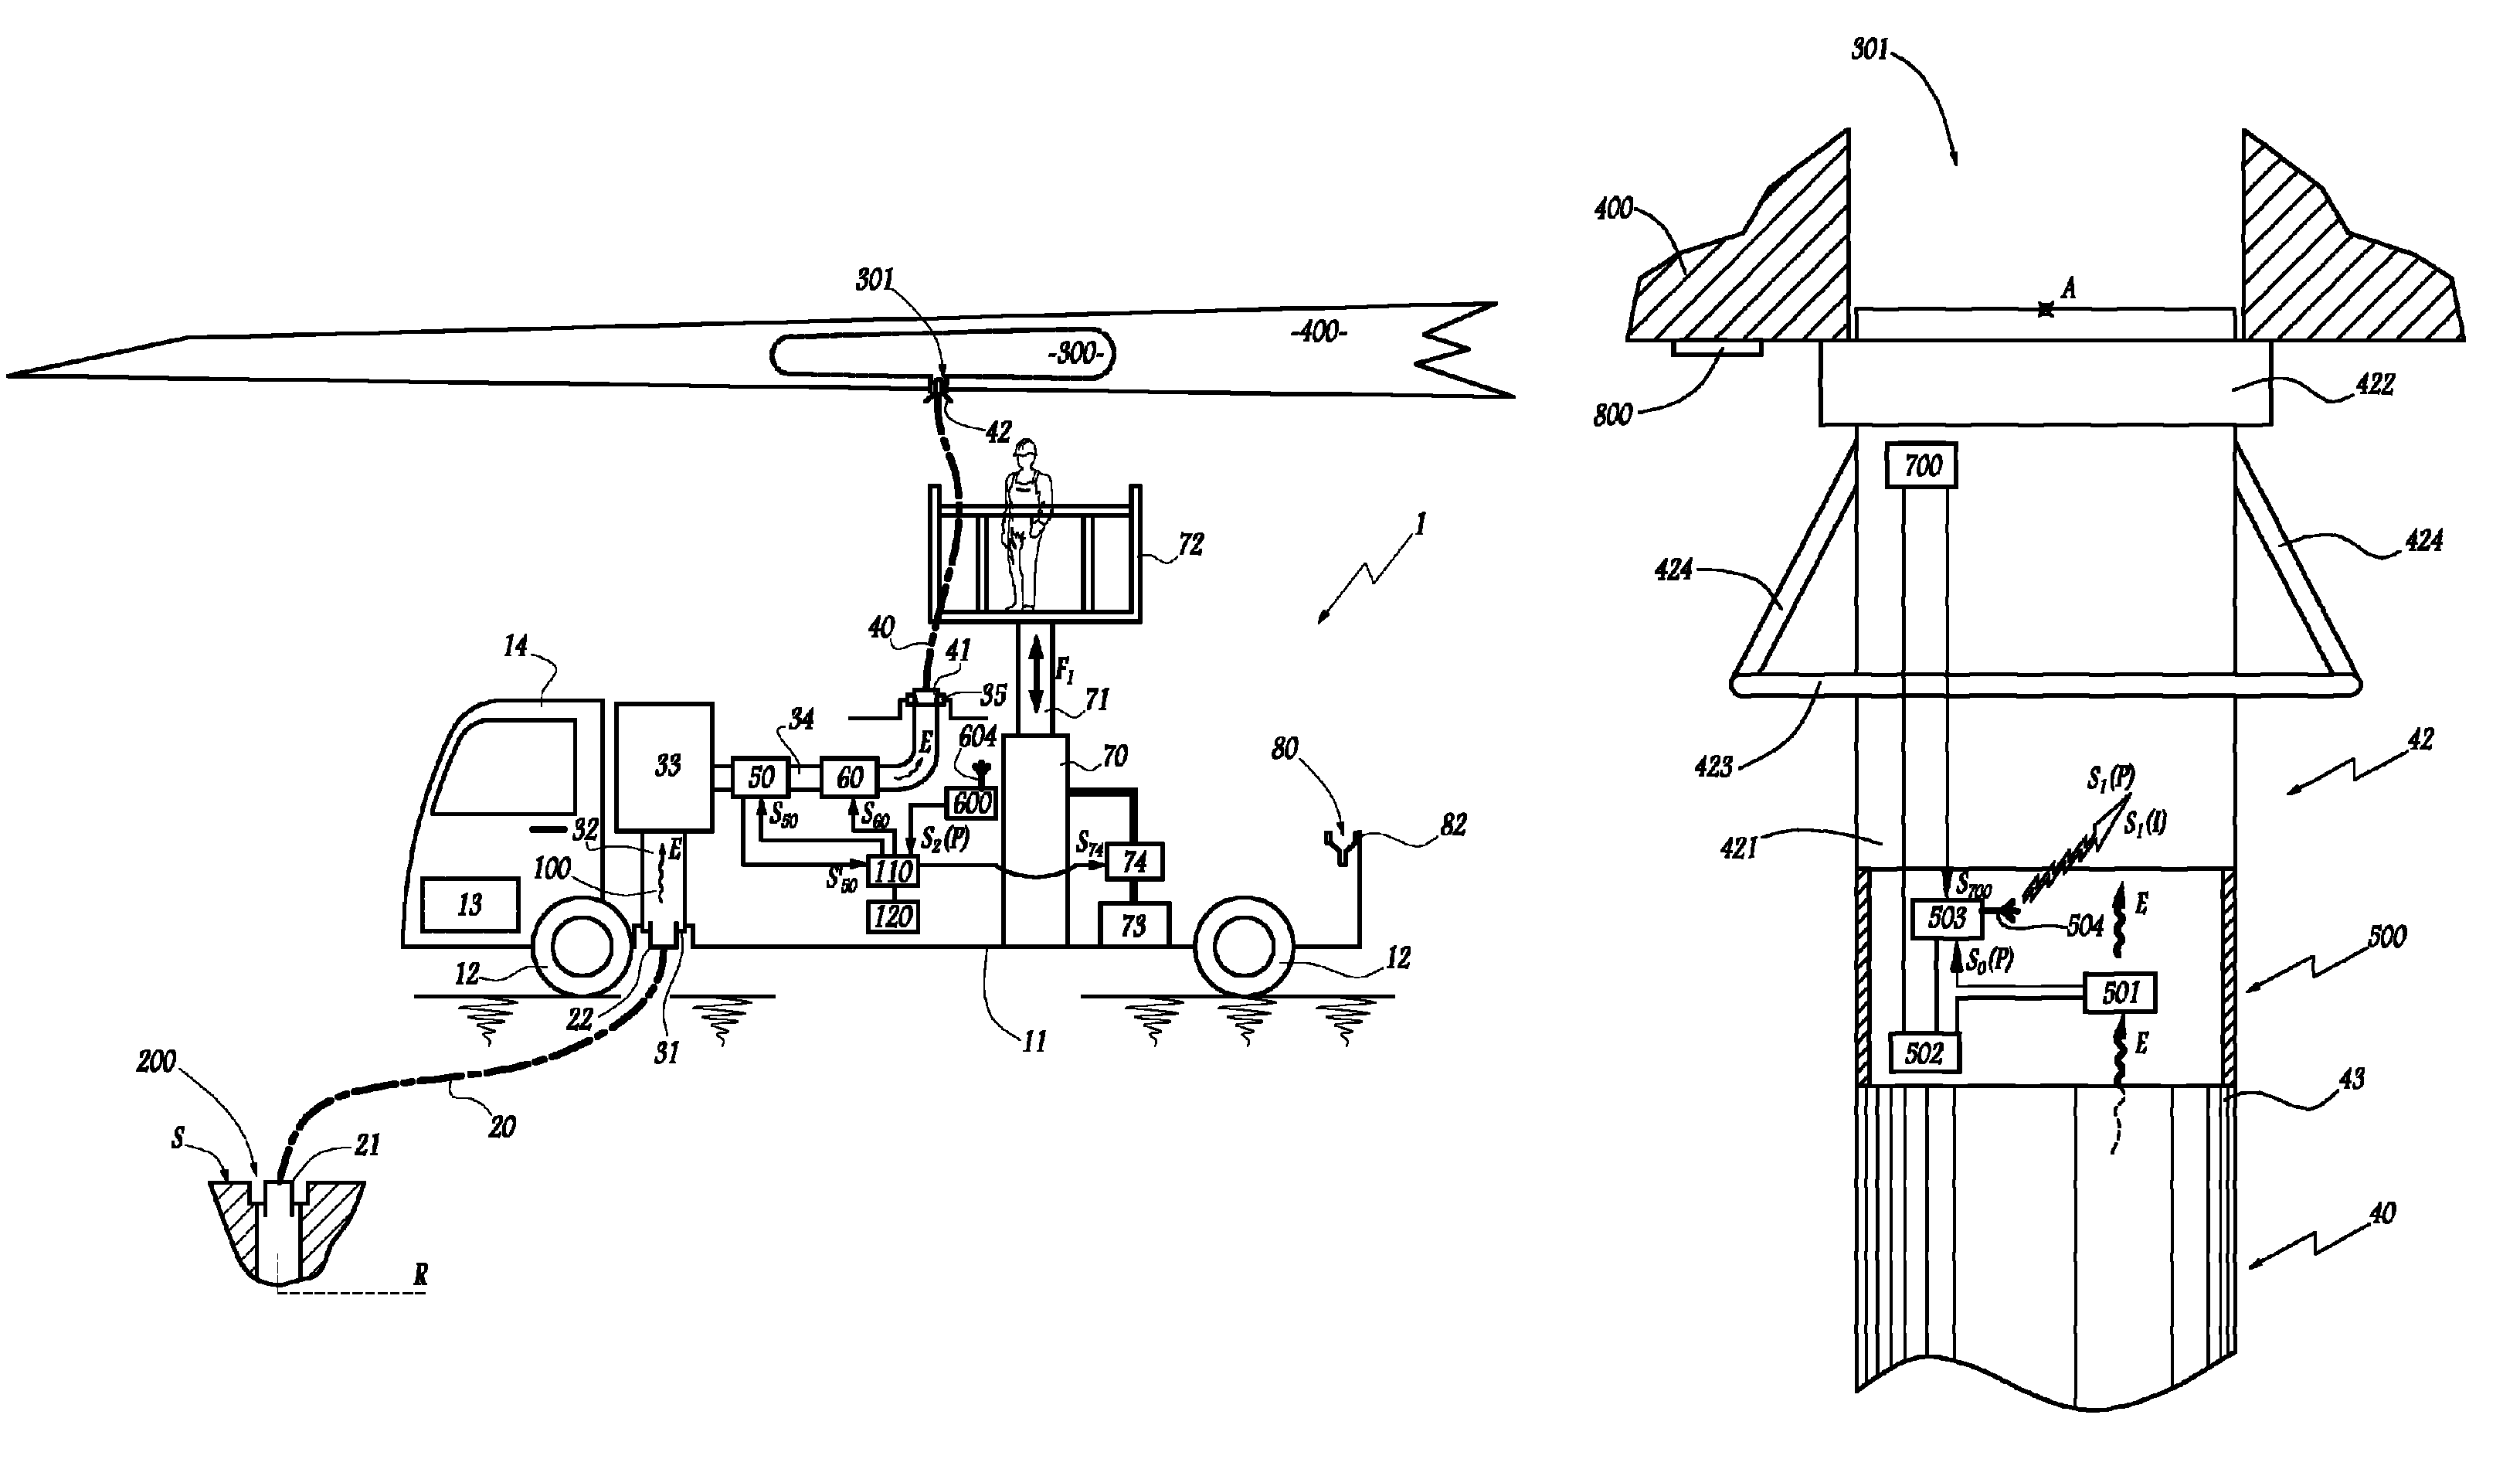 Refueling equipment, and method for refueling an aircraft using said equipment